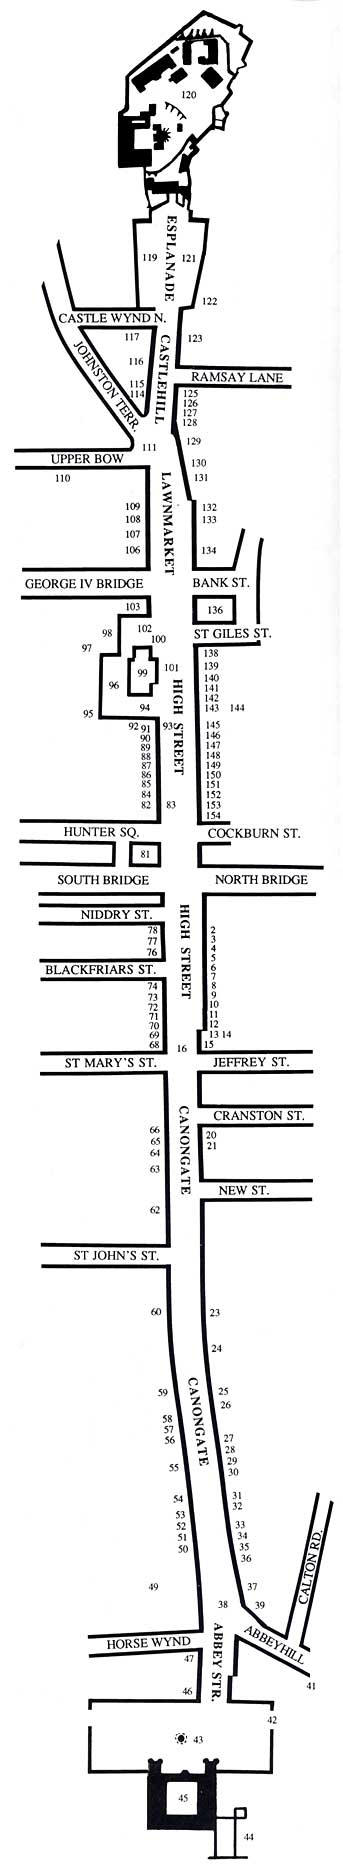 Map from 'A Guide to The Royal Mile' by Gordon Wrighr  -  first published 1979